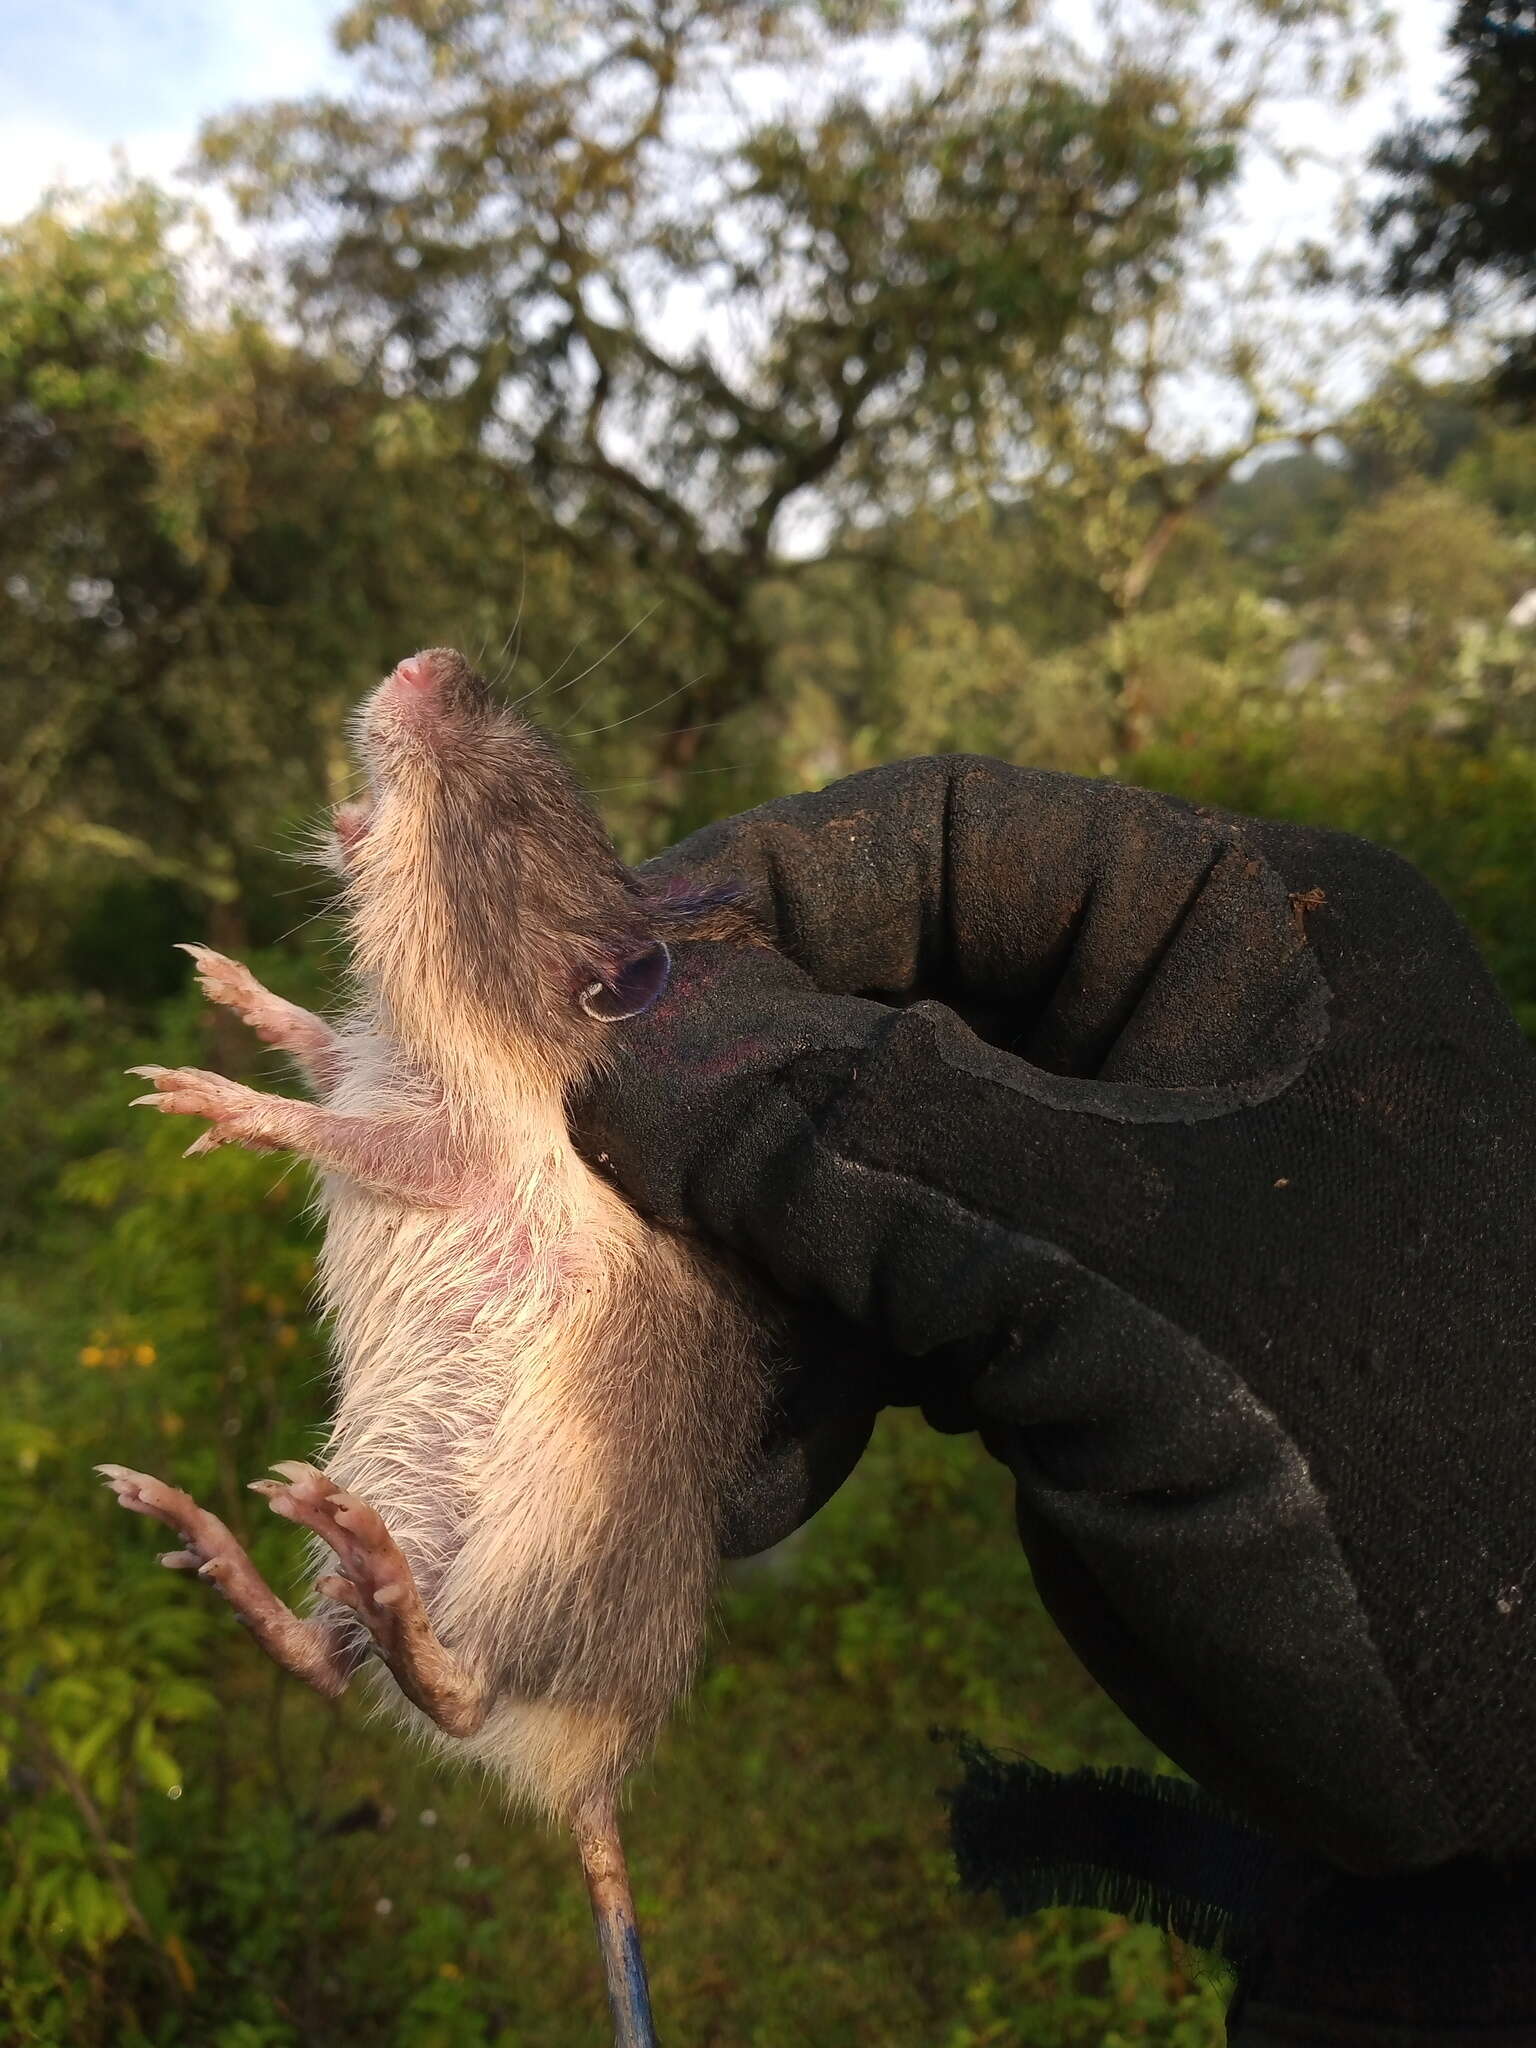 Image of Mexican spiny pocket mouse